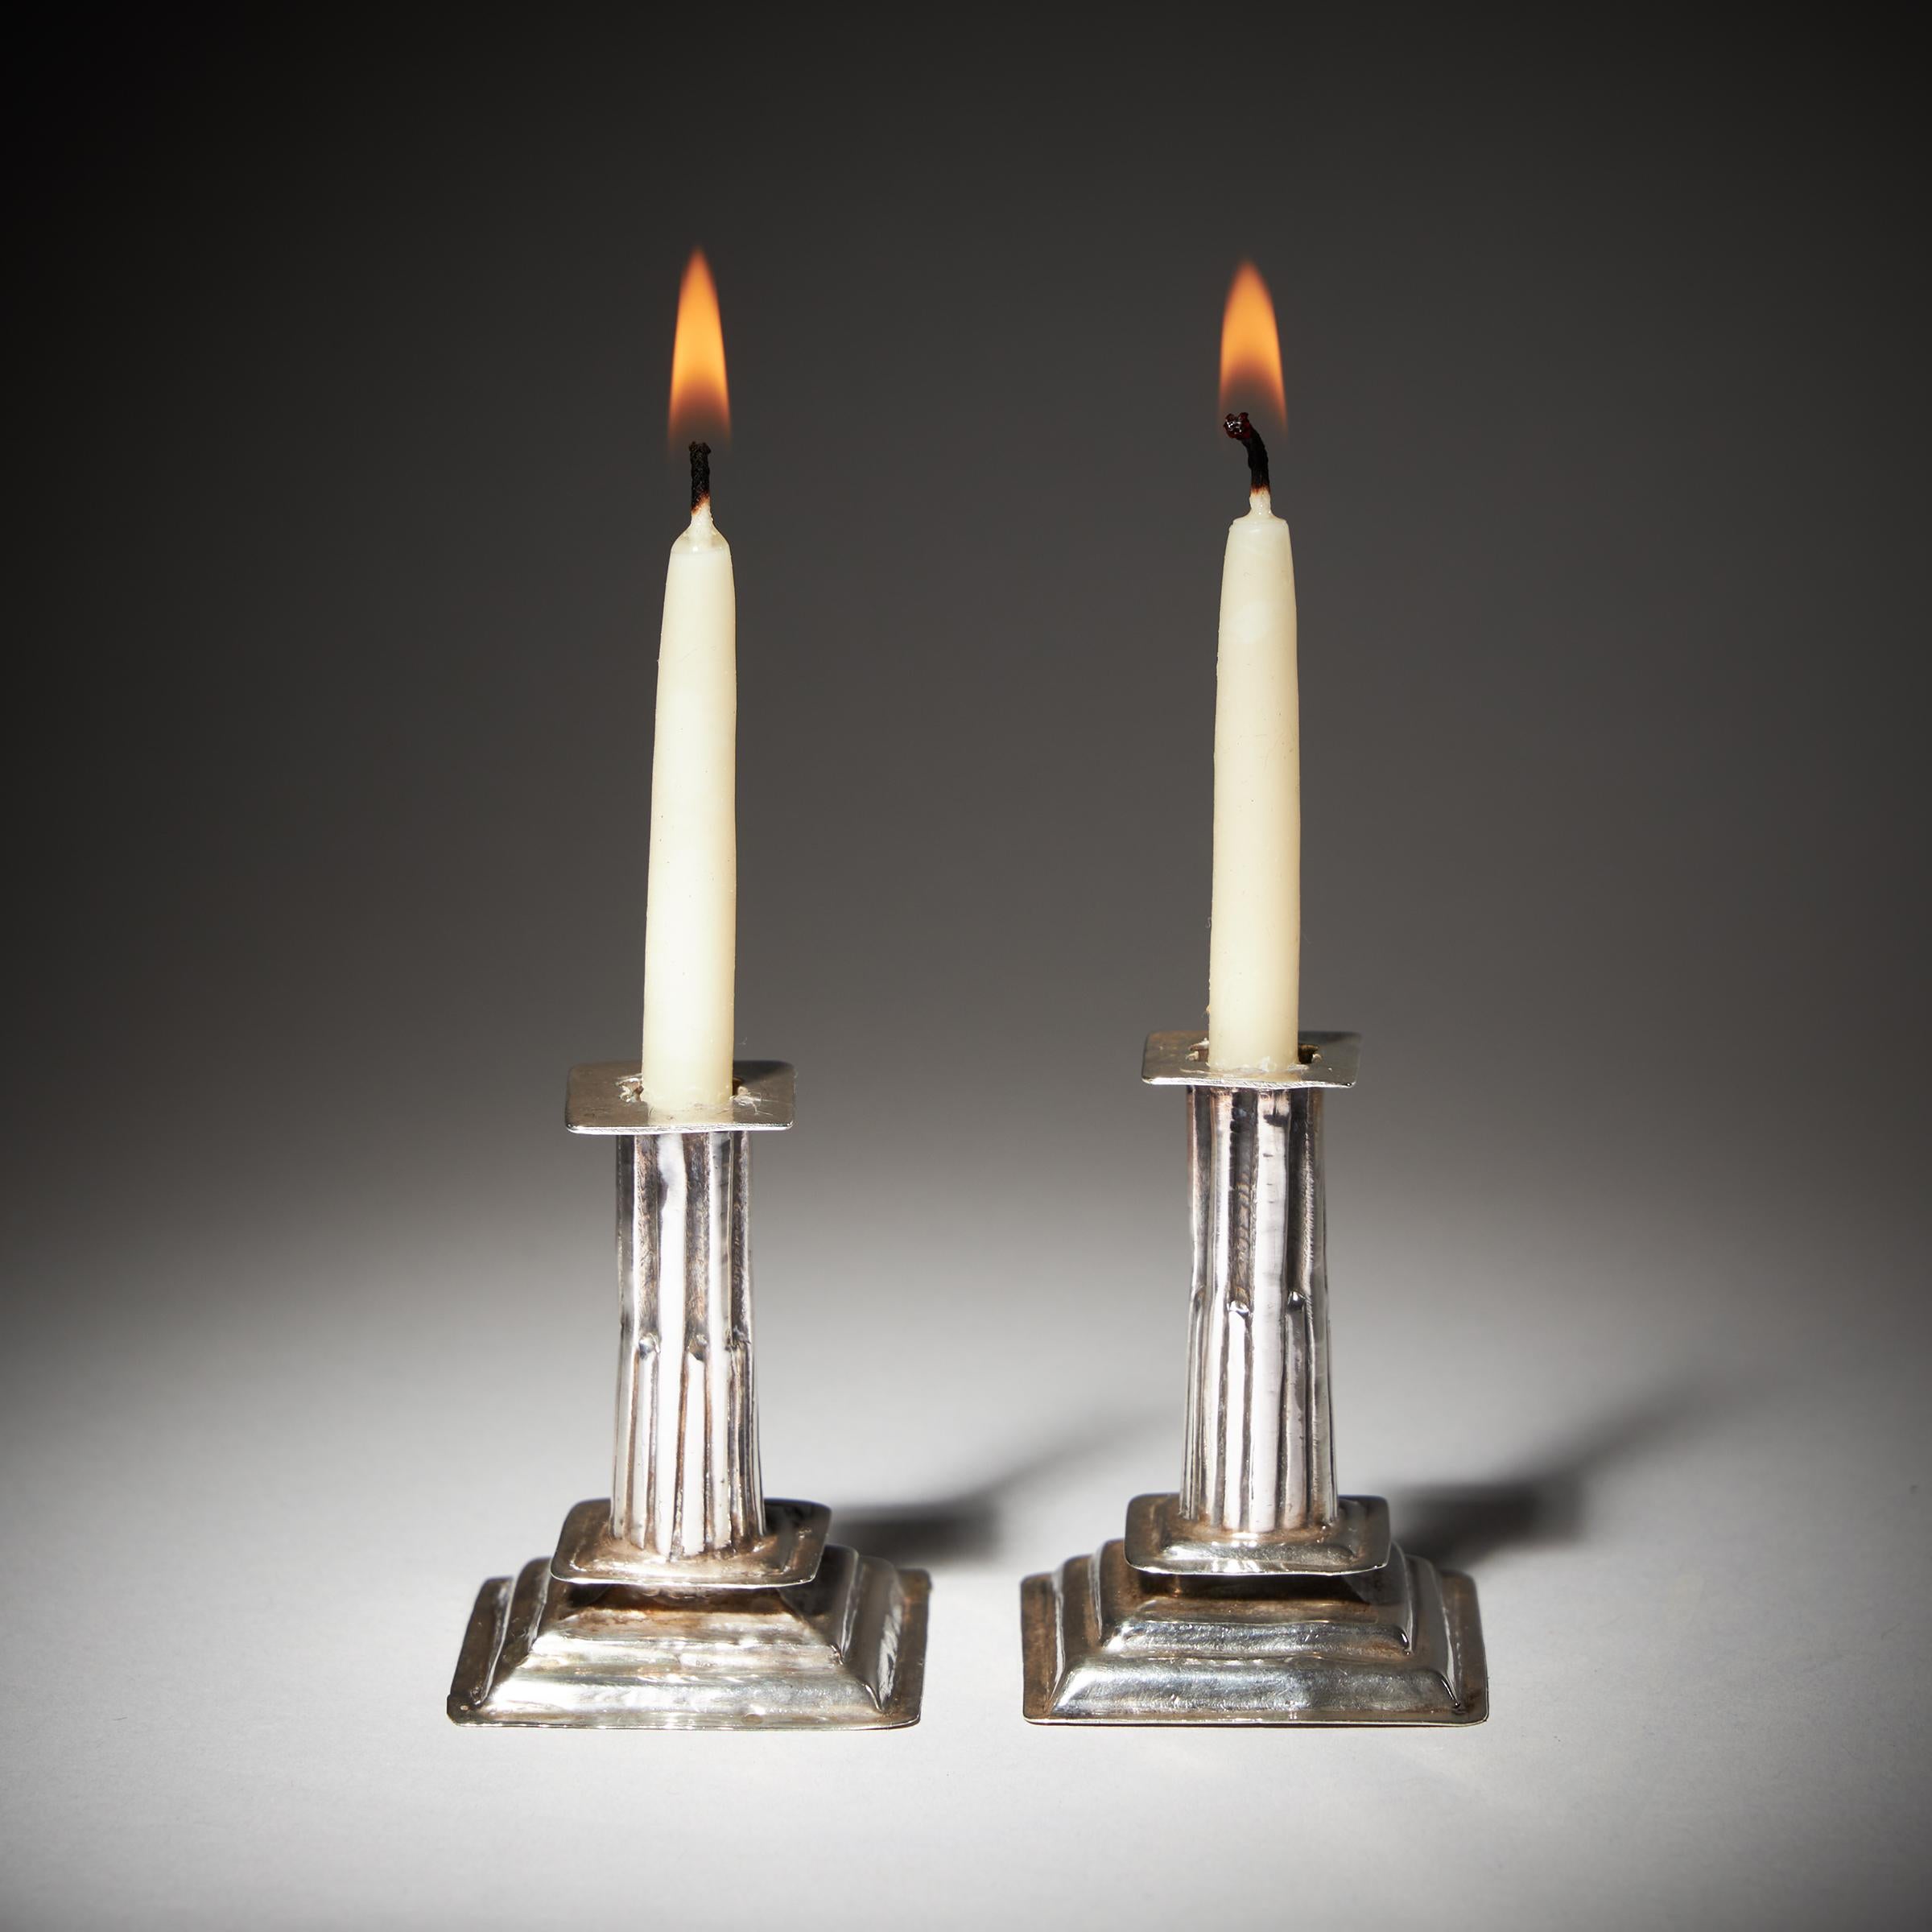 A pair of very fine and exceptionally rare 17th Century William and Mary period miniature candlesticks by the renowned London Silversmith, George Manjoy (working c.1675-1720). 

They are dated O (1690/1691) and have the hallmark for George Manjoy.  